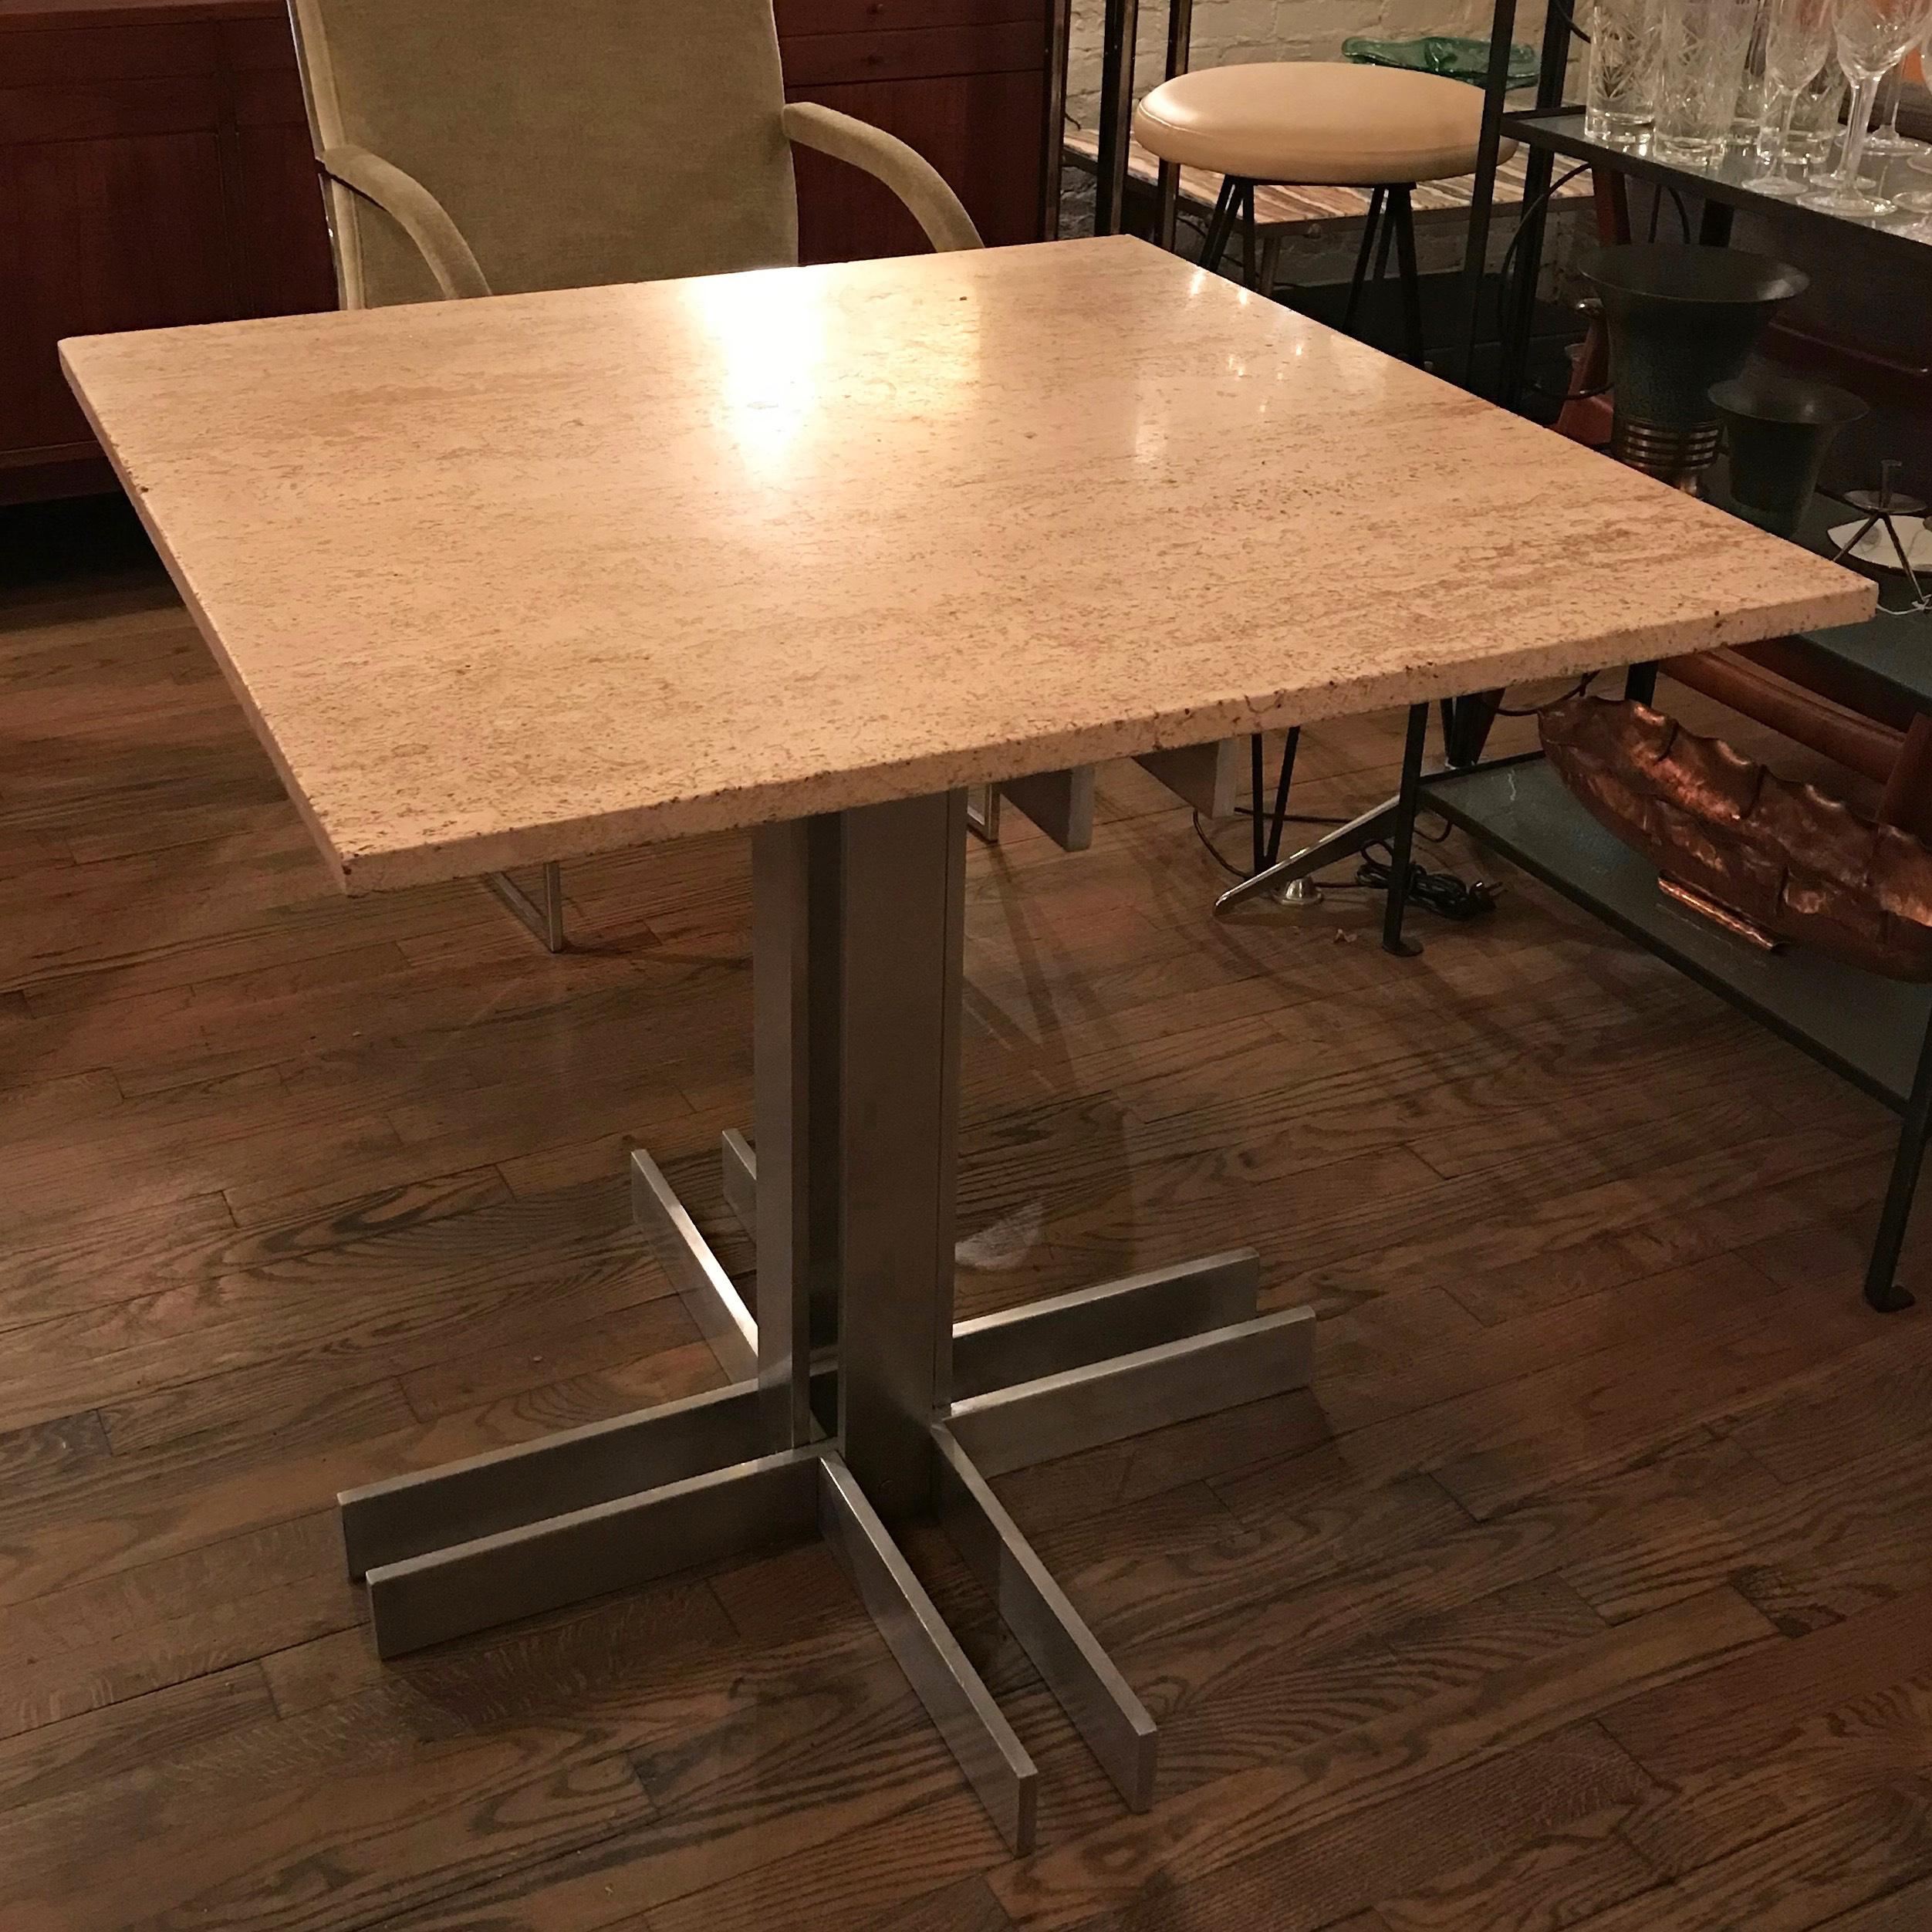 20th Century Postmodern Travertine Table with Architectural Aluminum Base